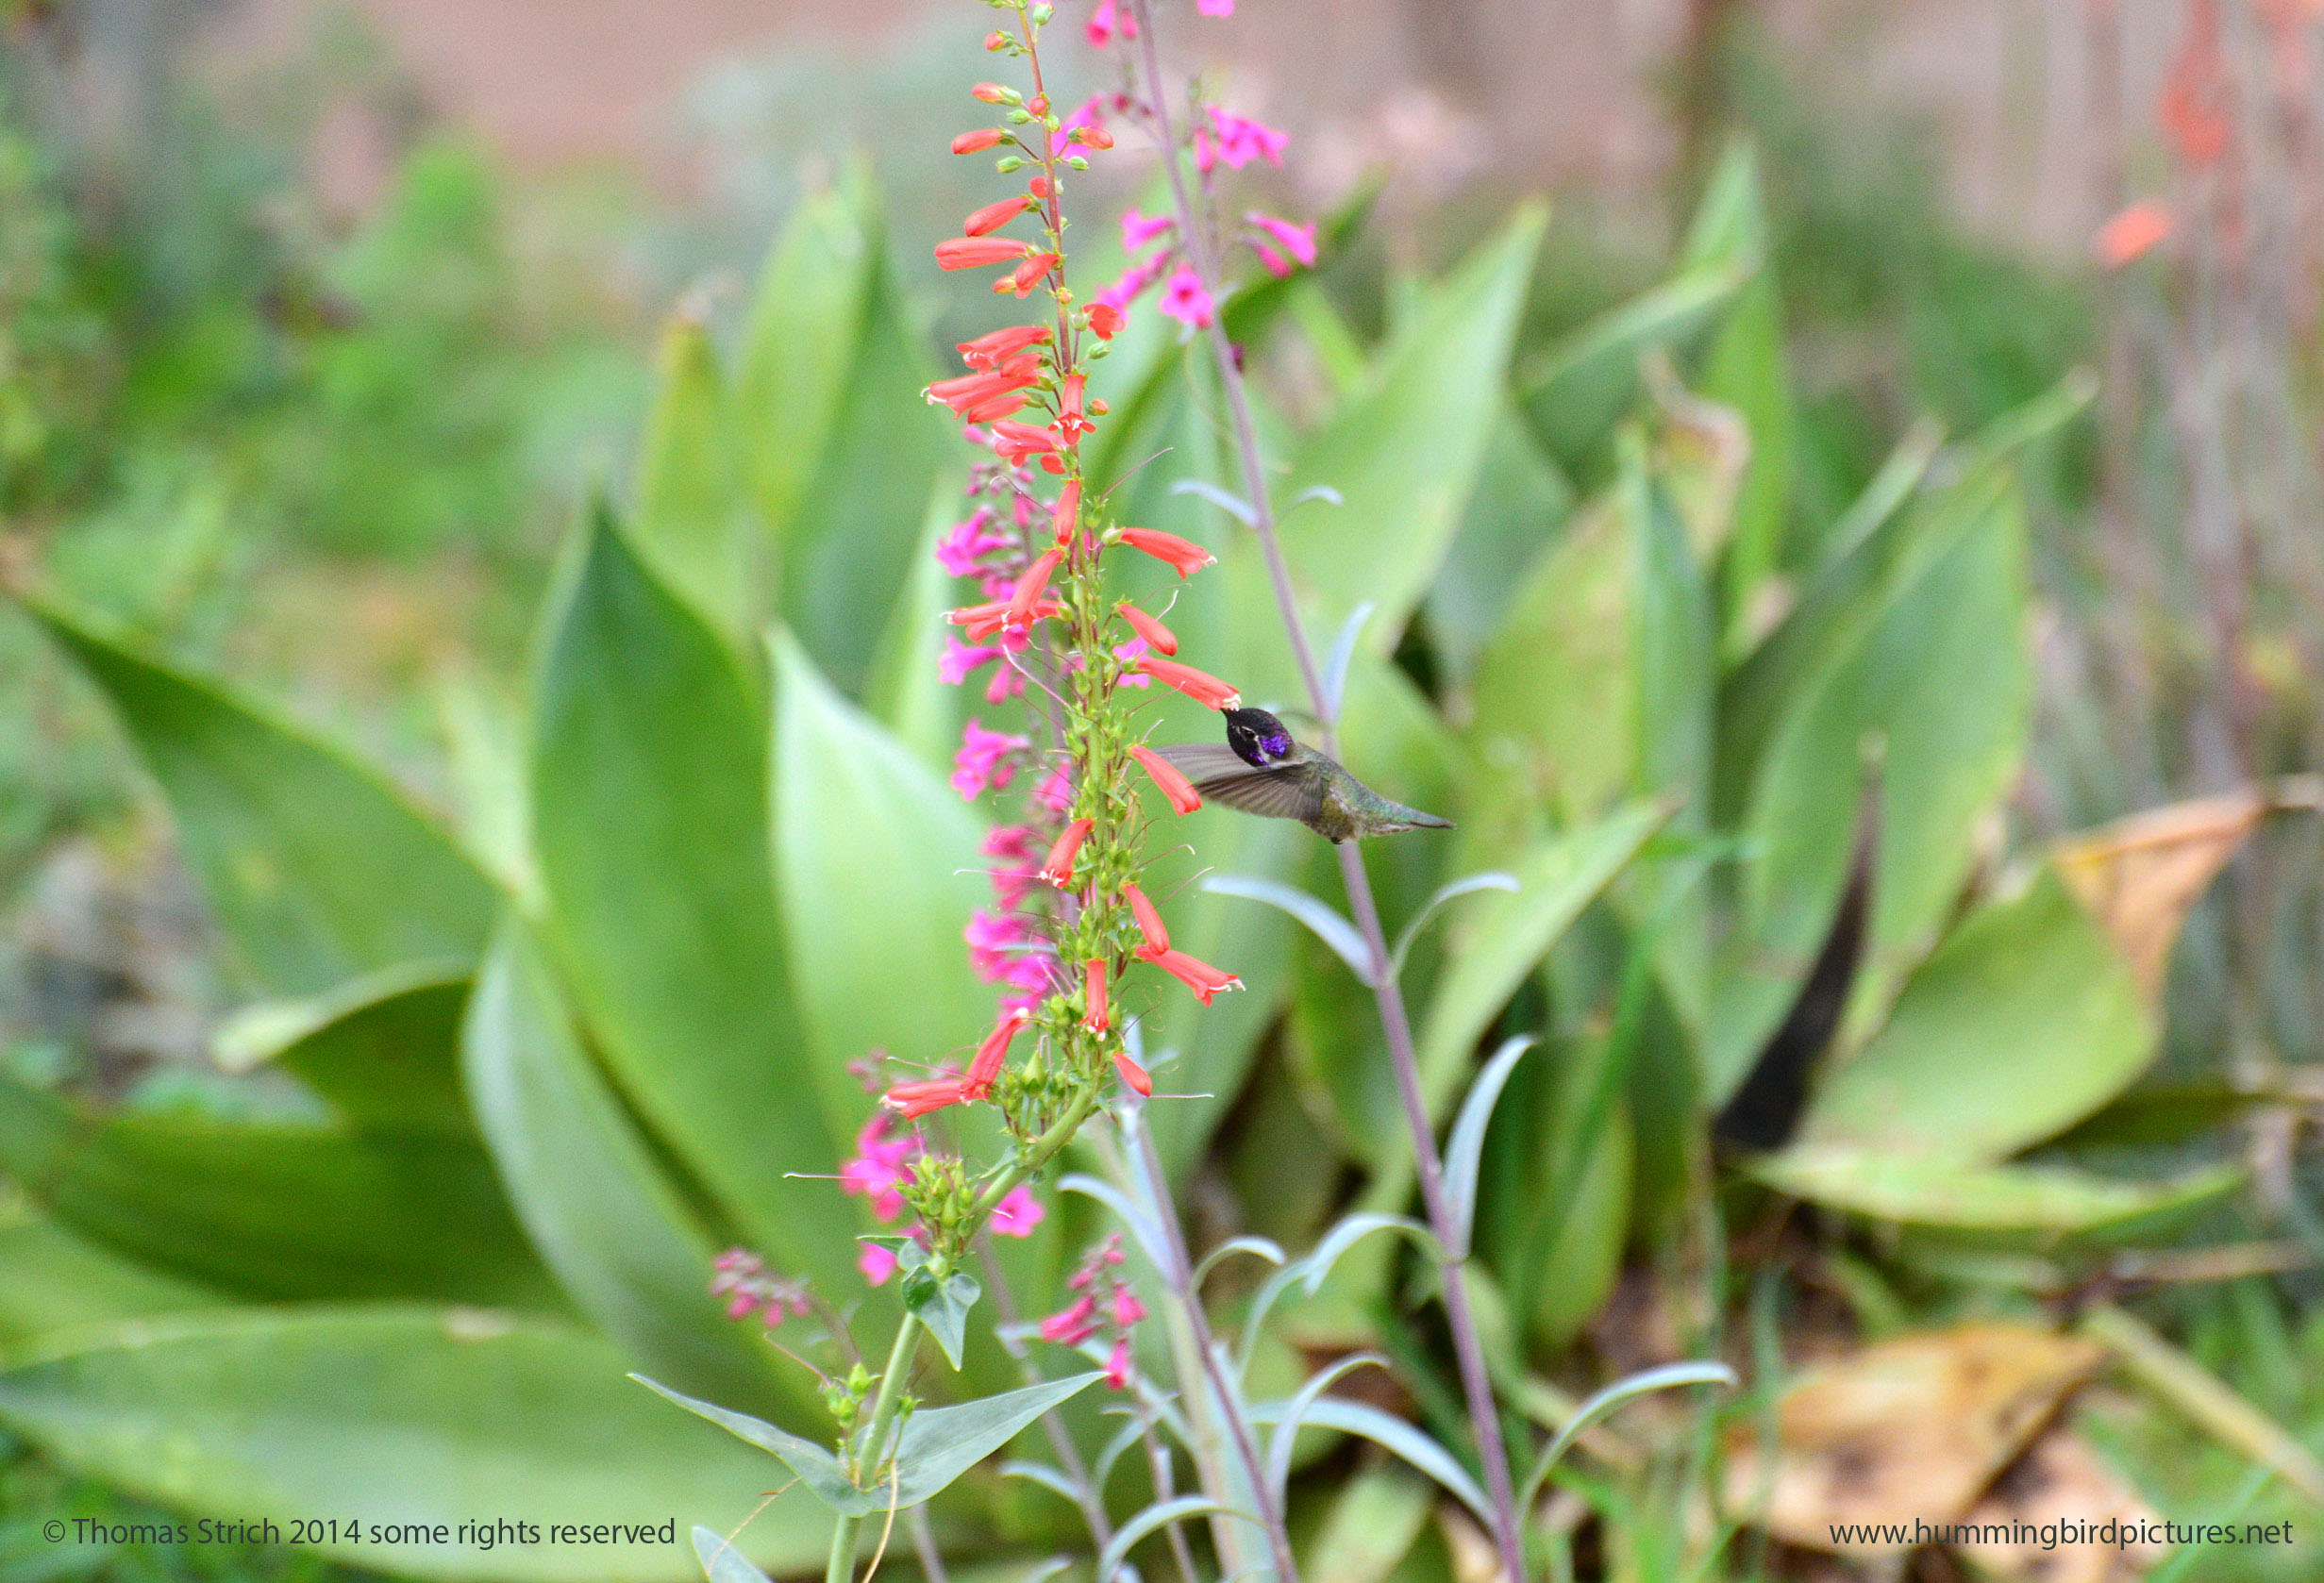 Costa's Hummingbird can be seen feeding at penstemon flowers in the distance